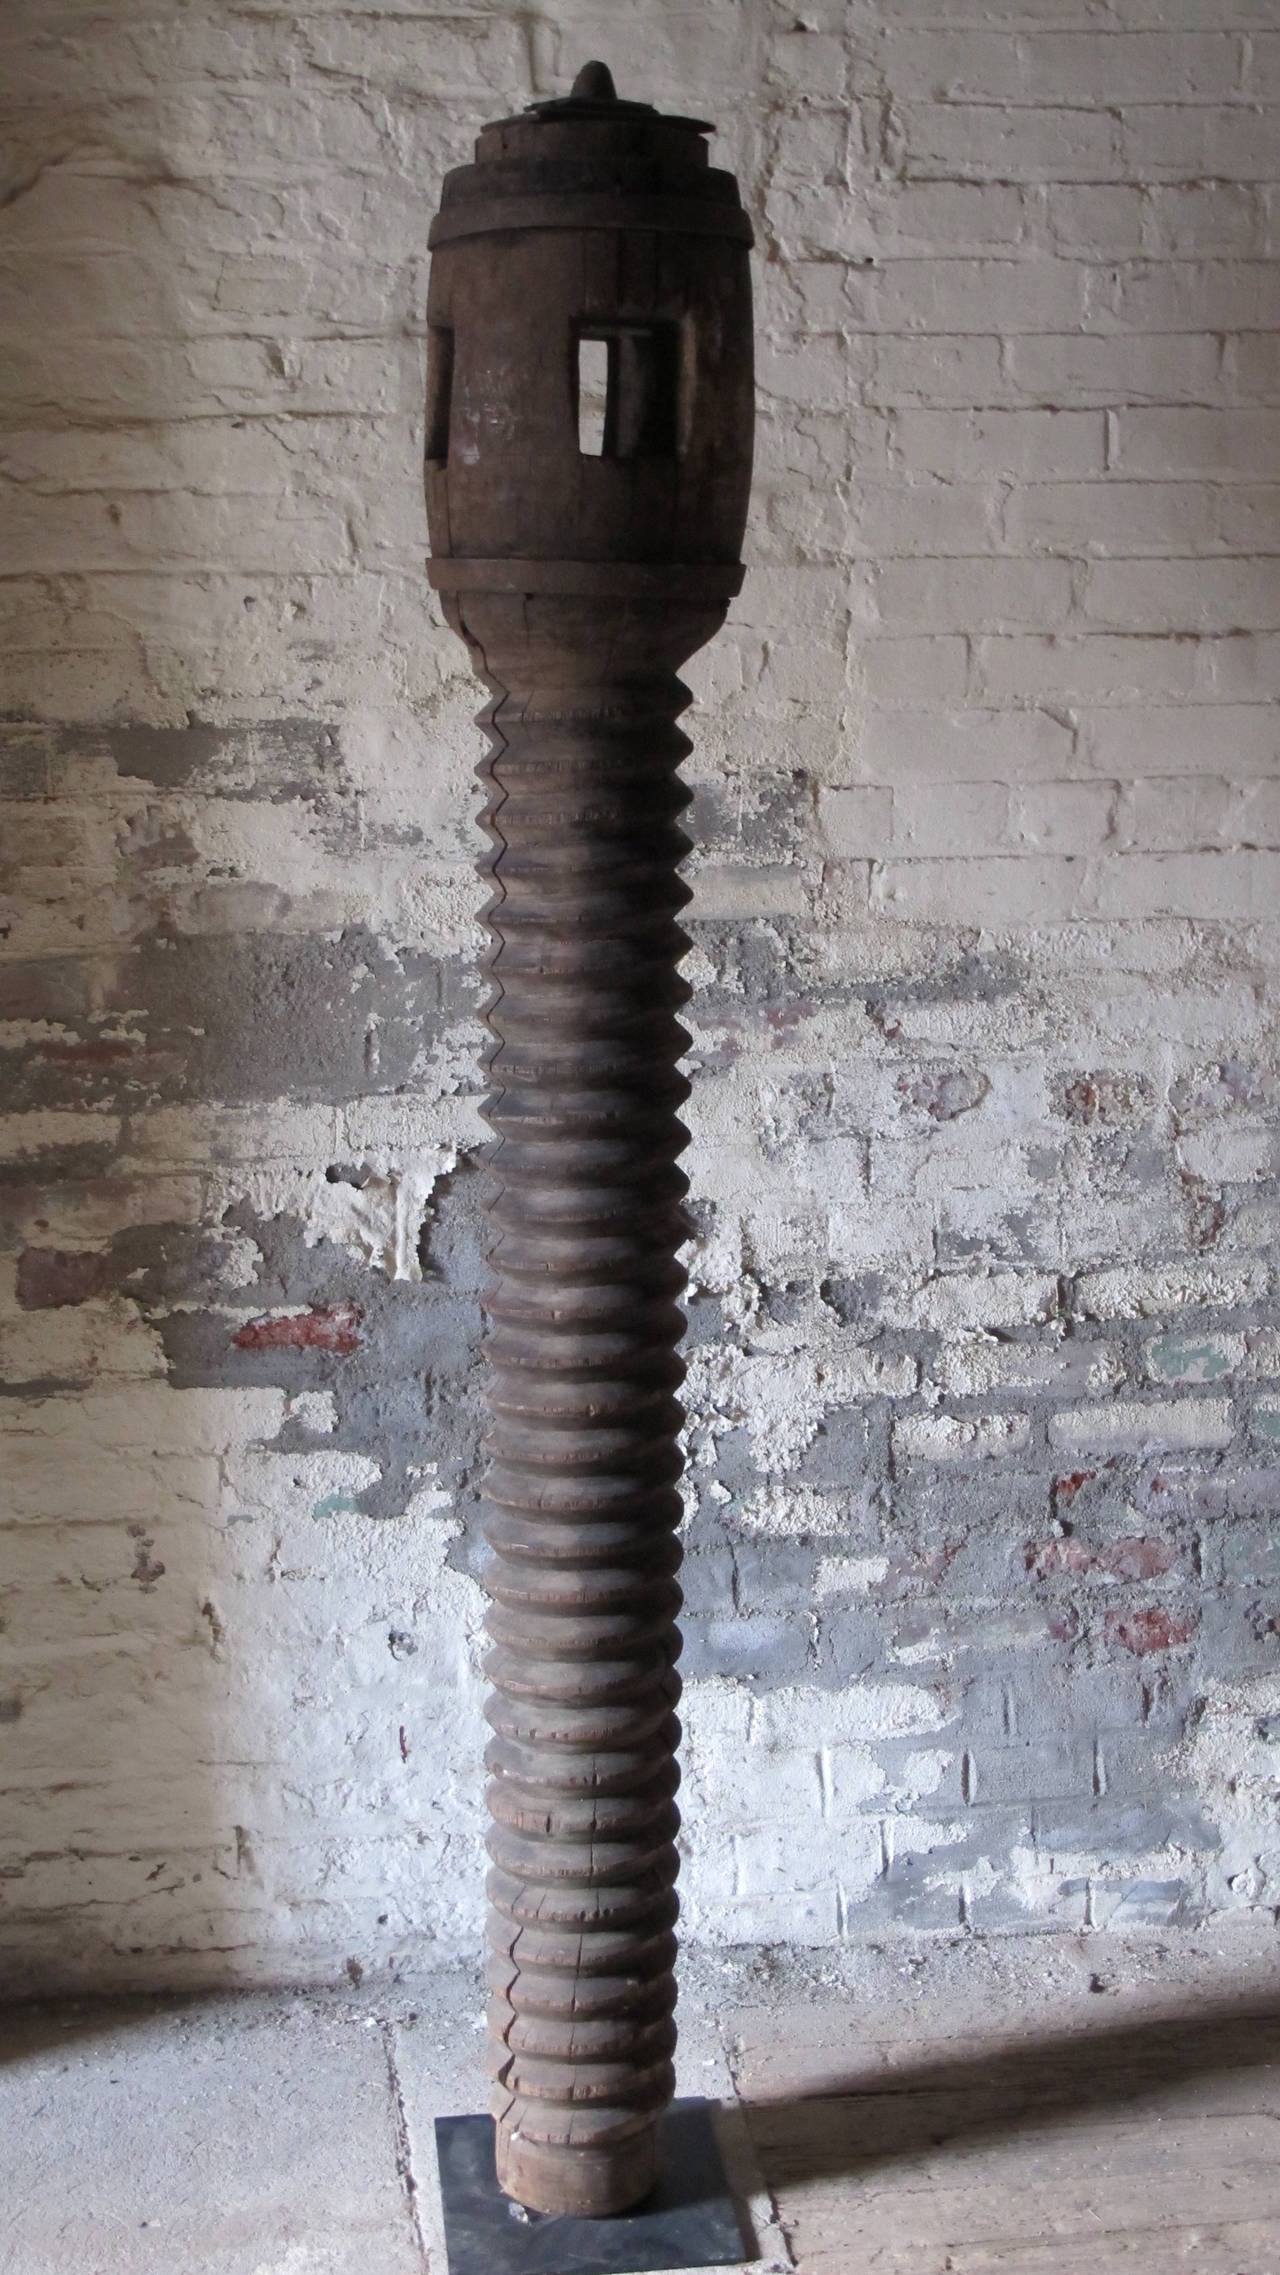 Probably made for use in making olive oil as a screw press, Most of its length is a threaded screw with a wider barrel shaped top with rectangular slots cut through. Mounted on a black metal floor stand.